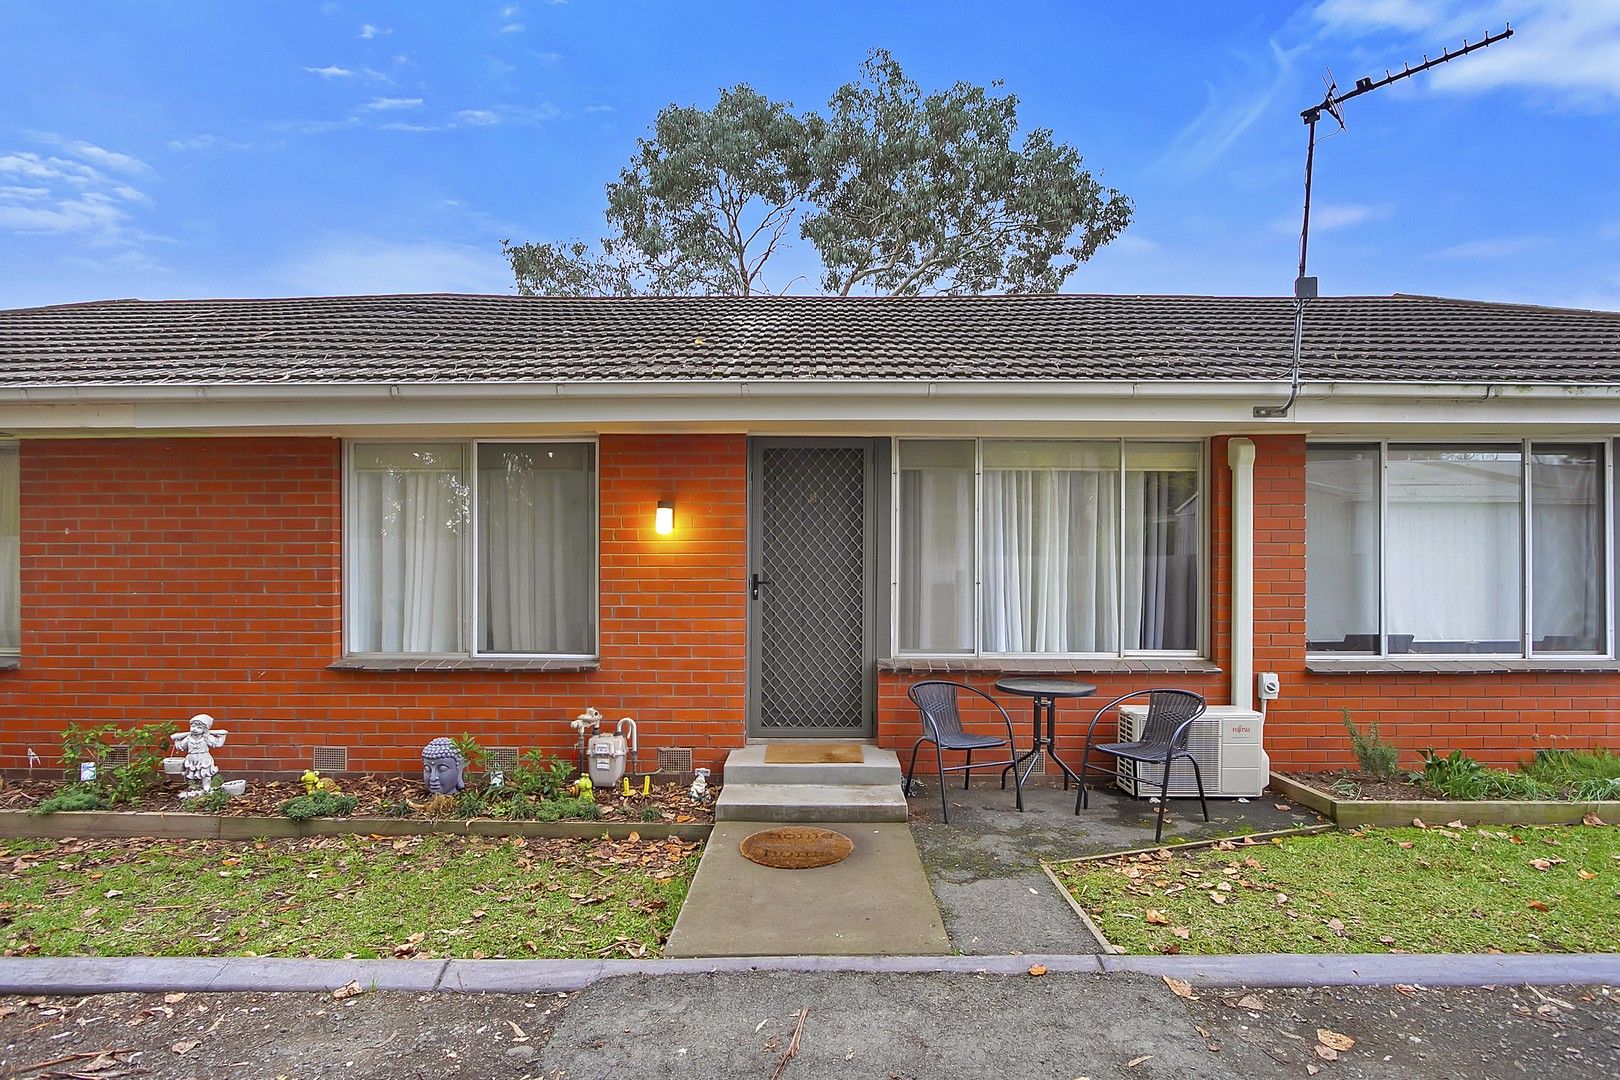 2 bedrooms House in 5/5 Foster Street SALE VIC, 3850